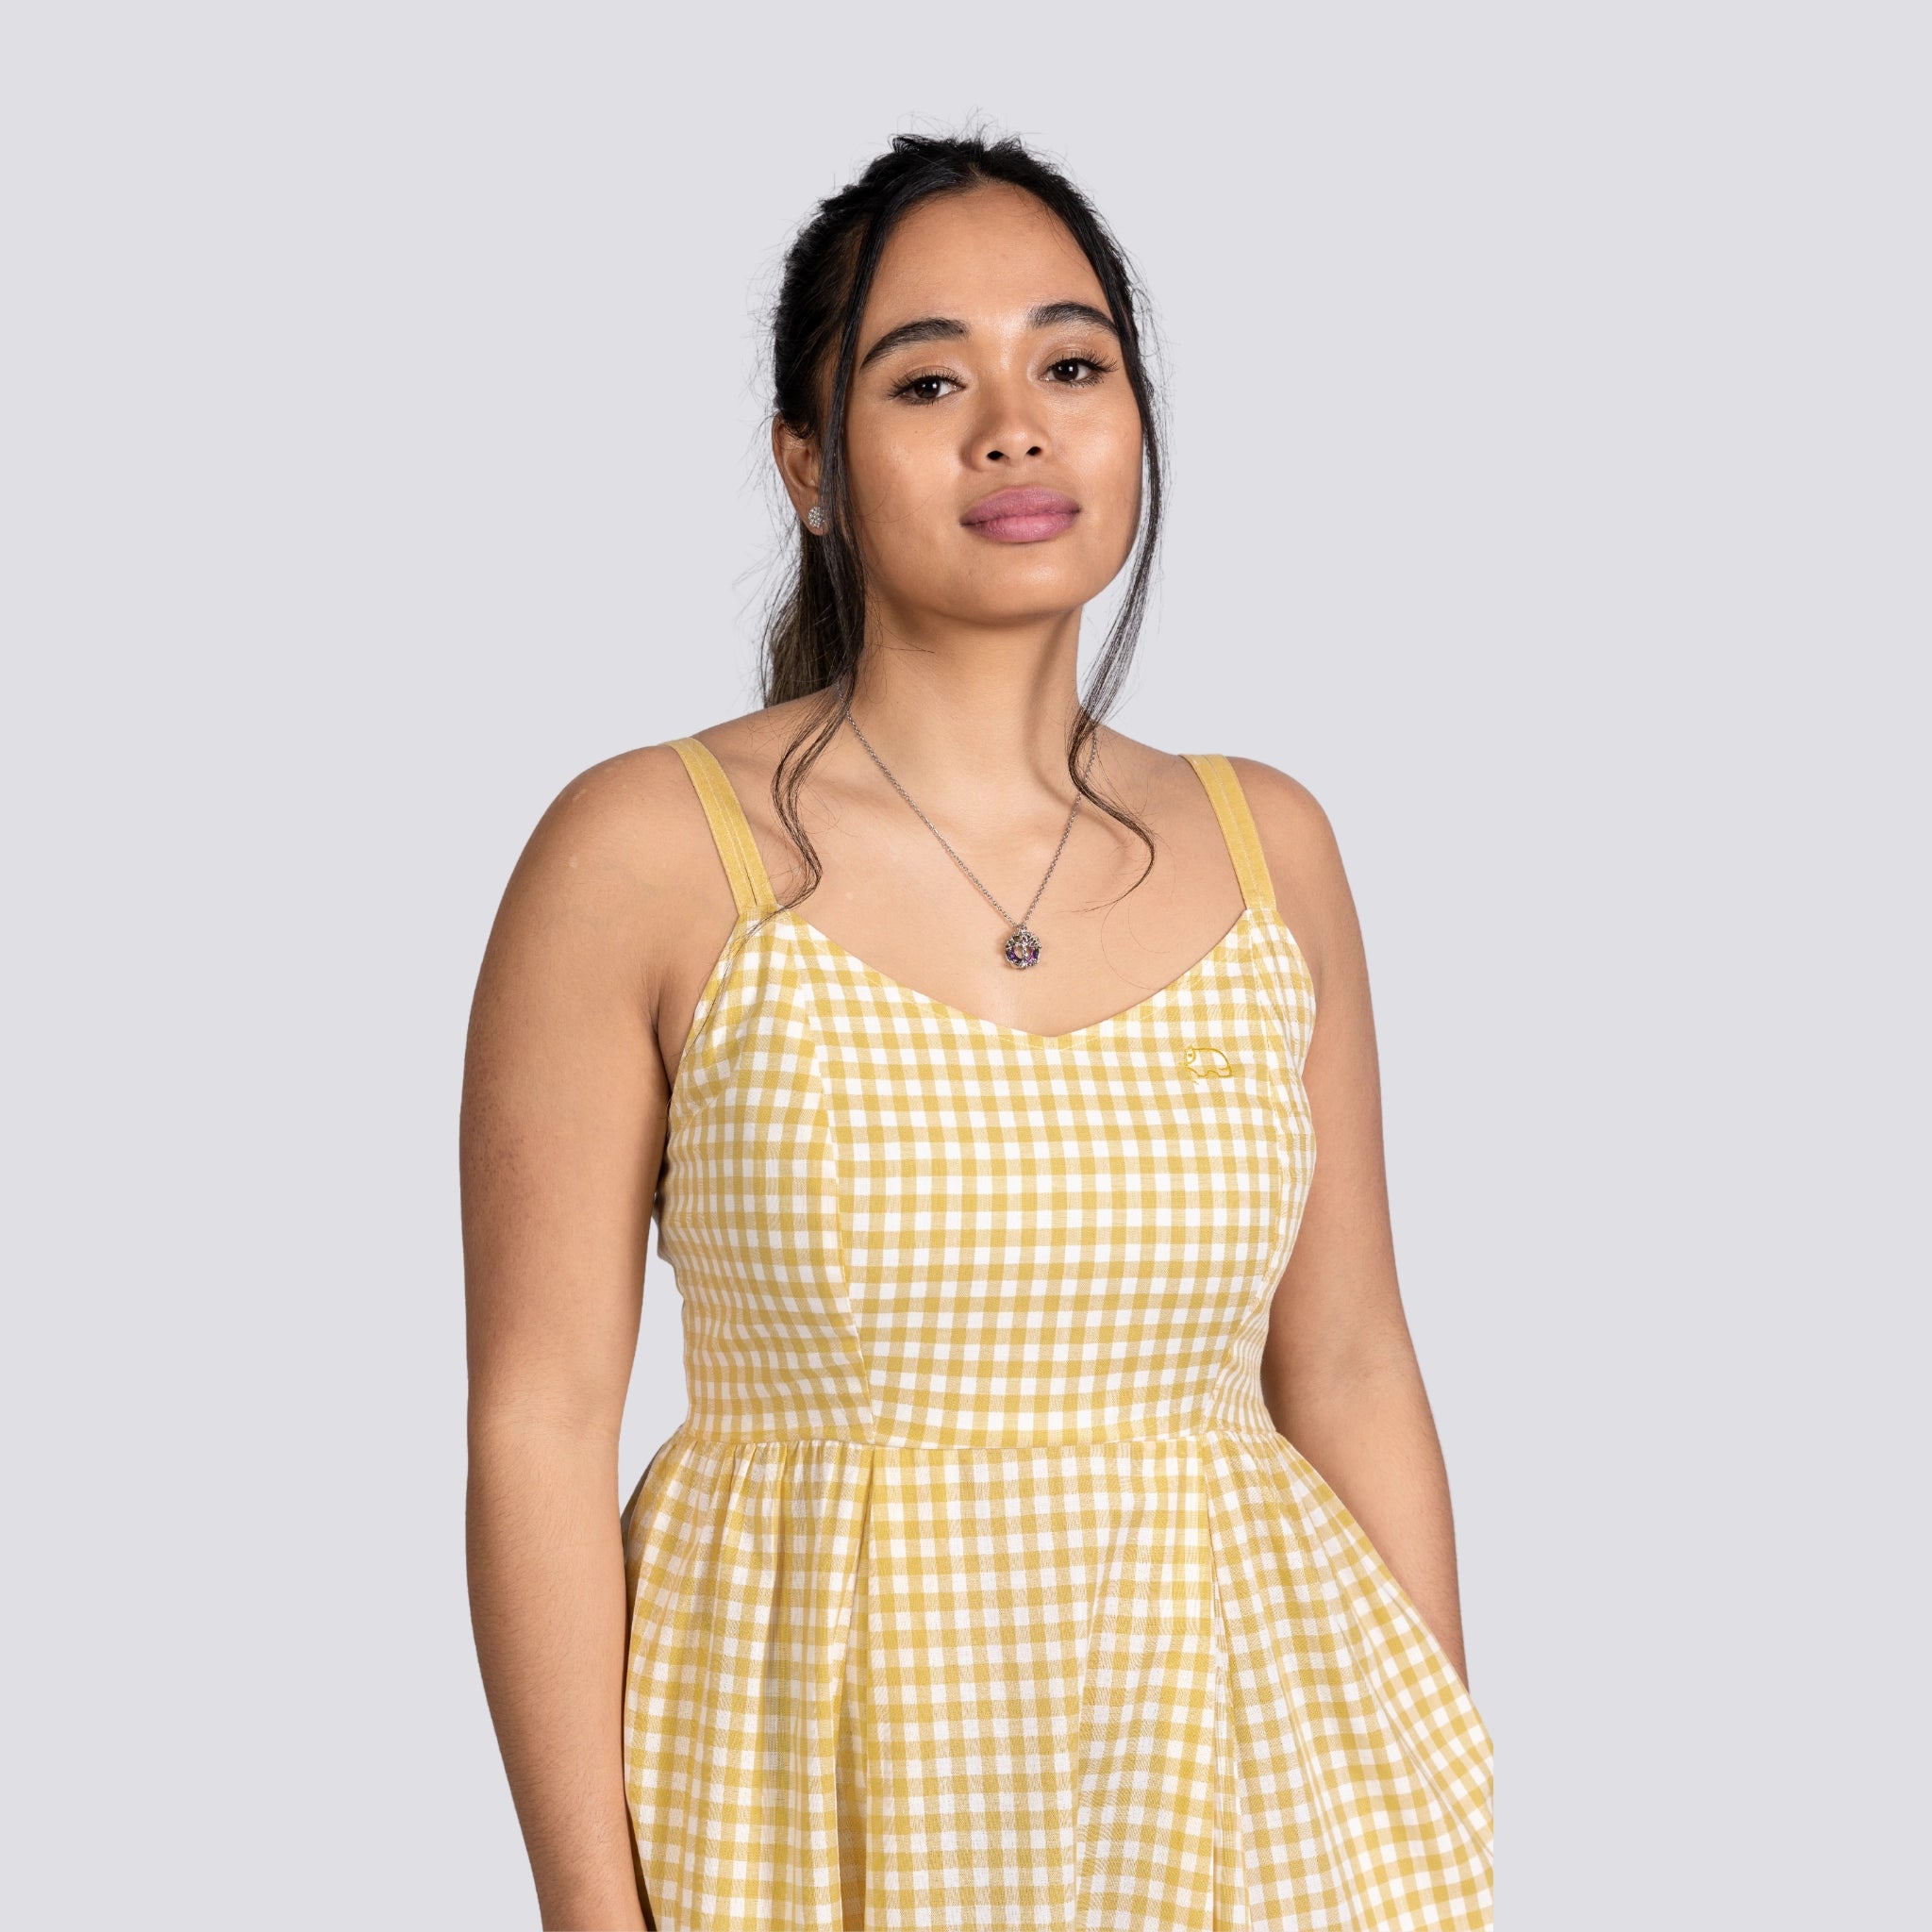 A woman wearing a Karee Sunshine Chic Yellow Gingham Cotton Mini Dress stands against a neutral background. The limited-edition cotton dress features a yellow and white checkered pattern. She has dark hair and is looking at the camera.